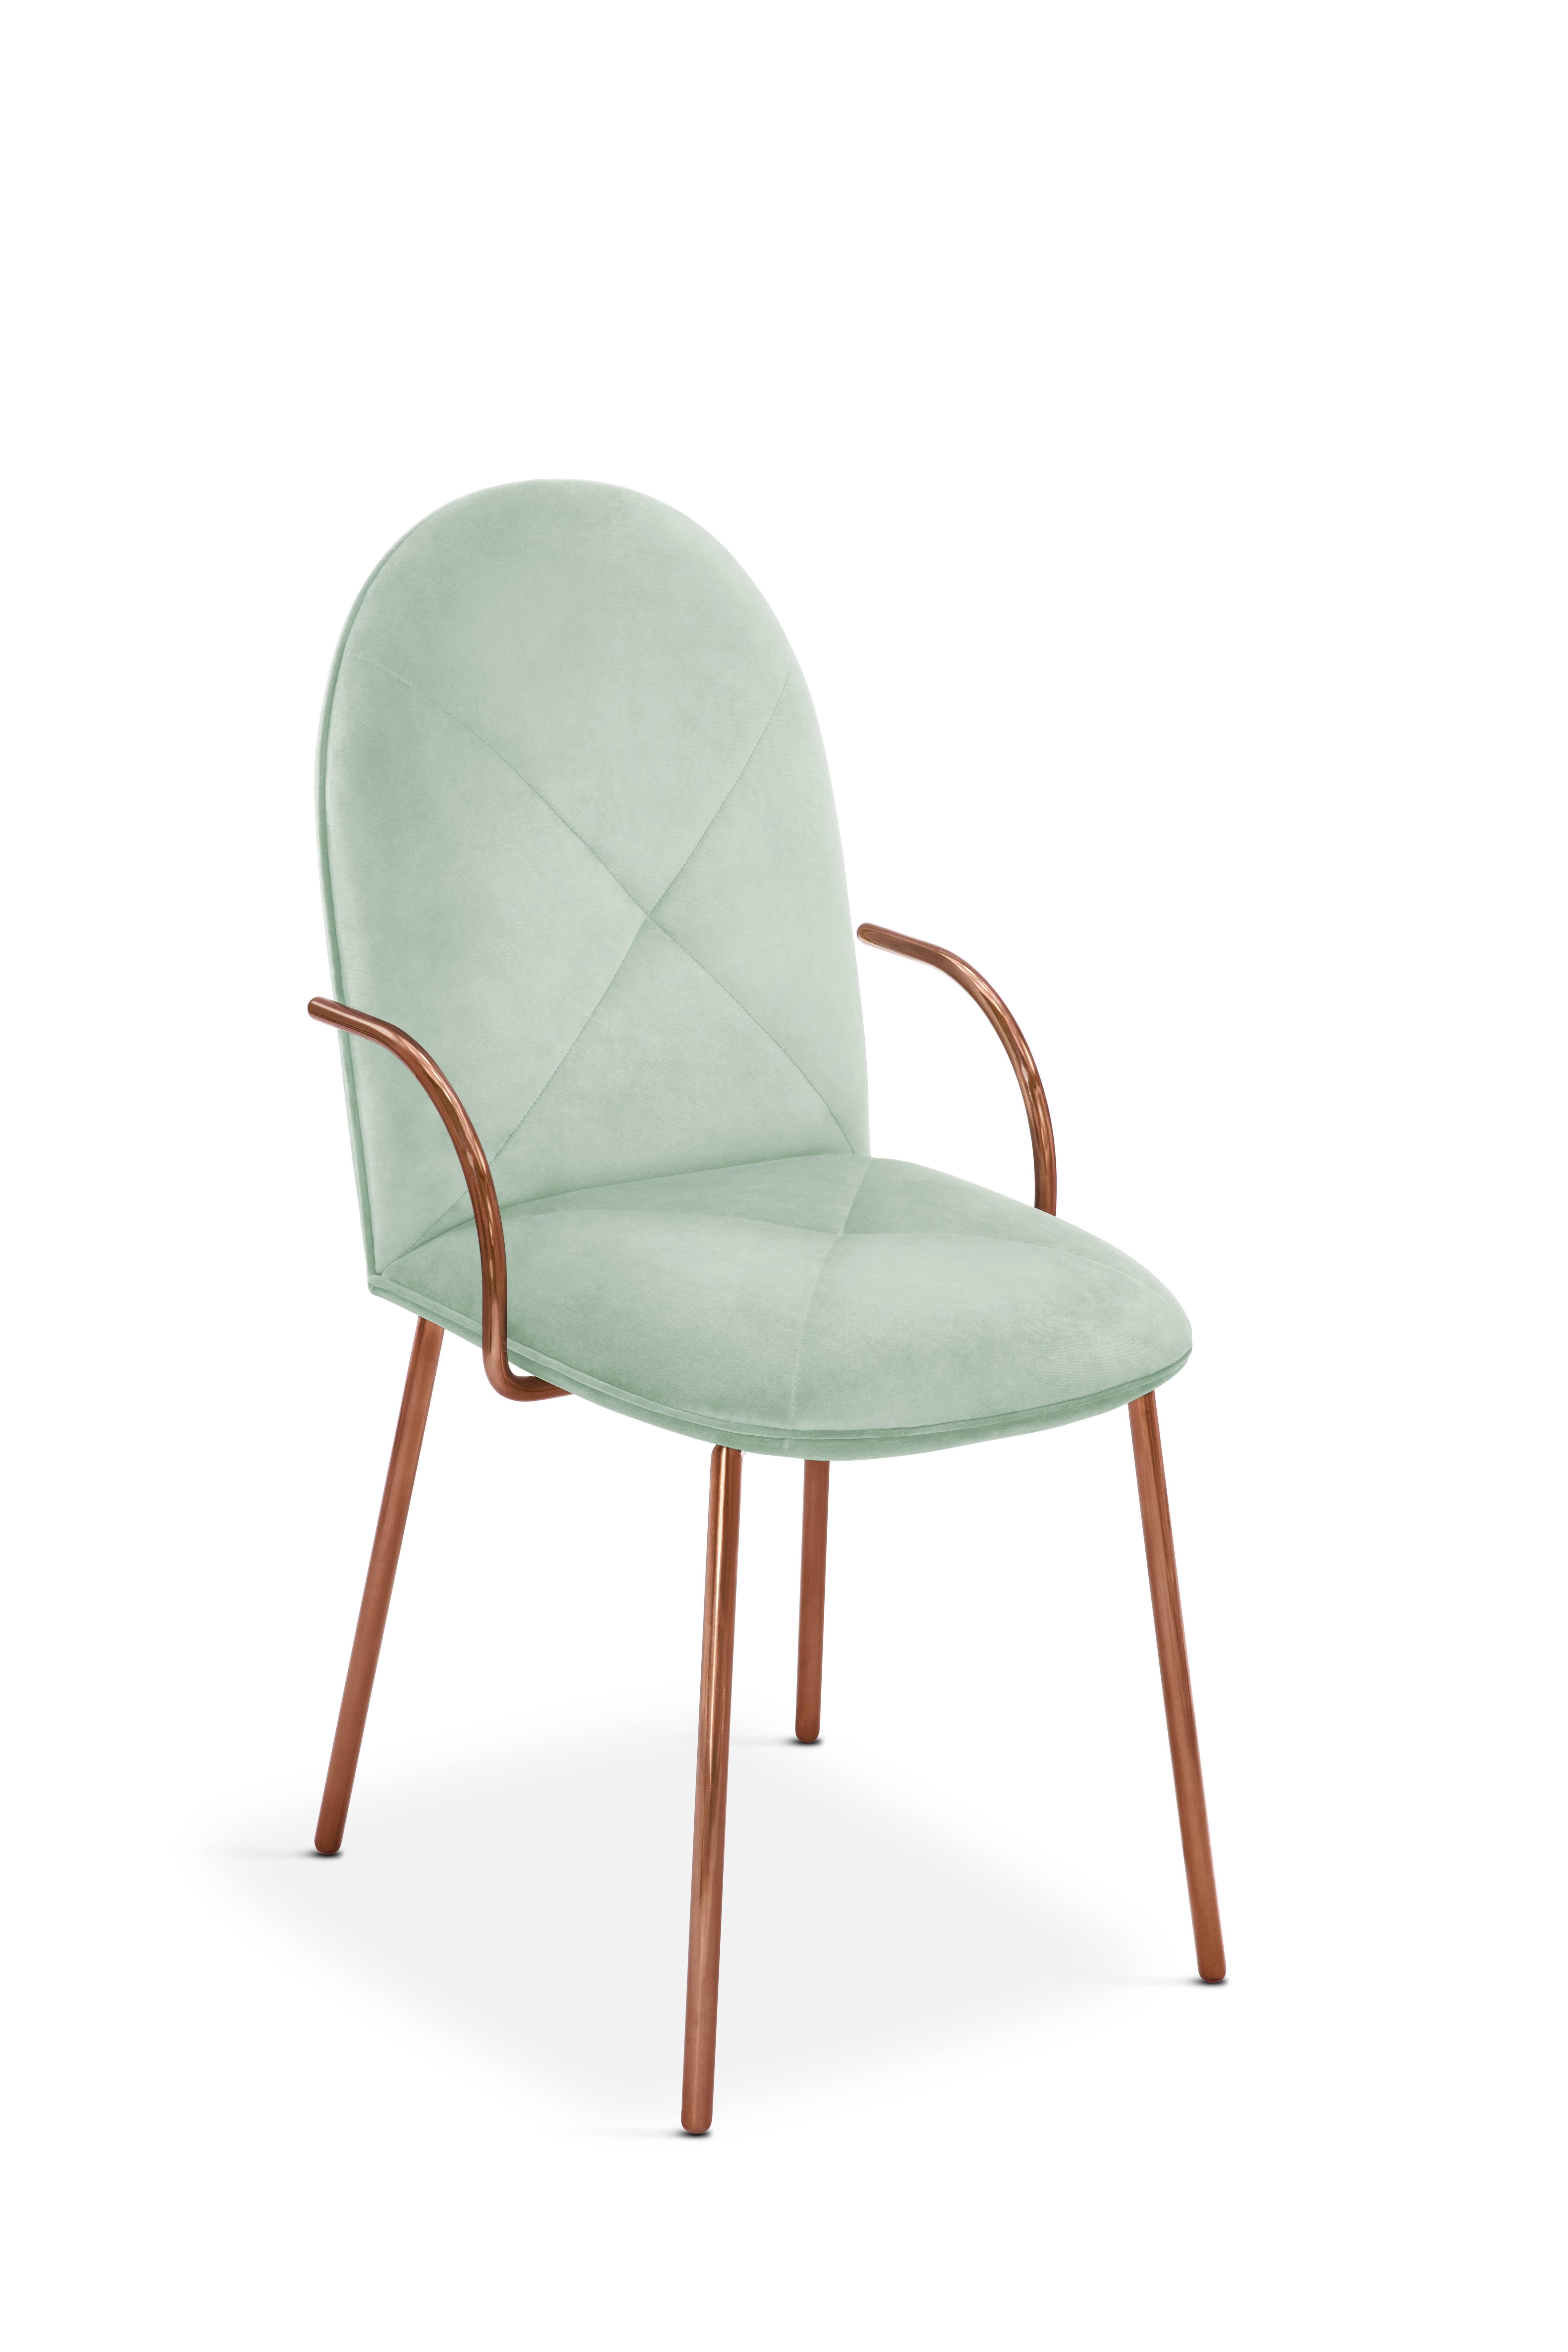 Contemporary Orion Chair Jade by Nika Zupanc for Scarlet Splendour For Sale